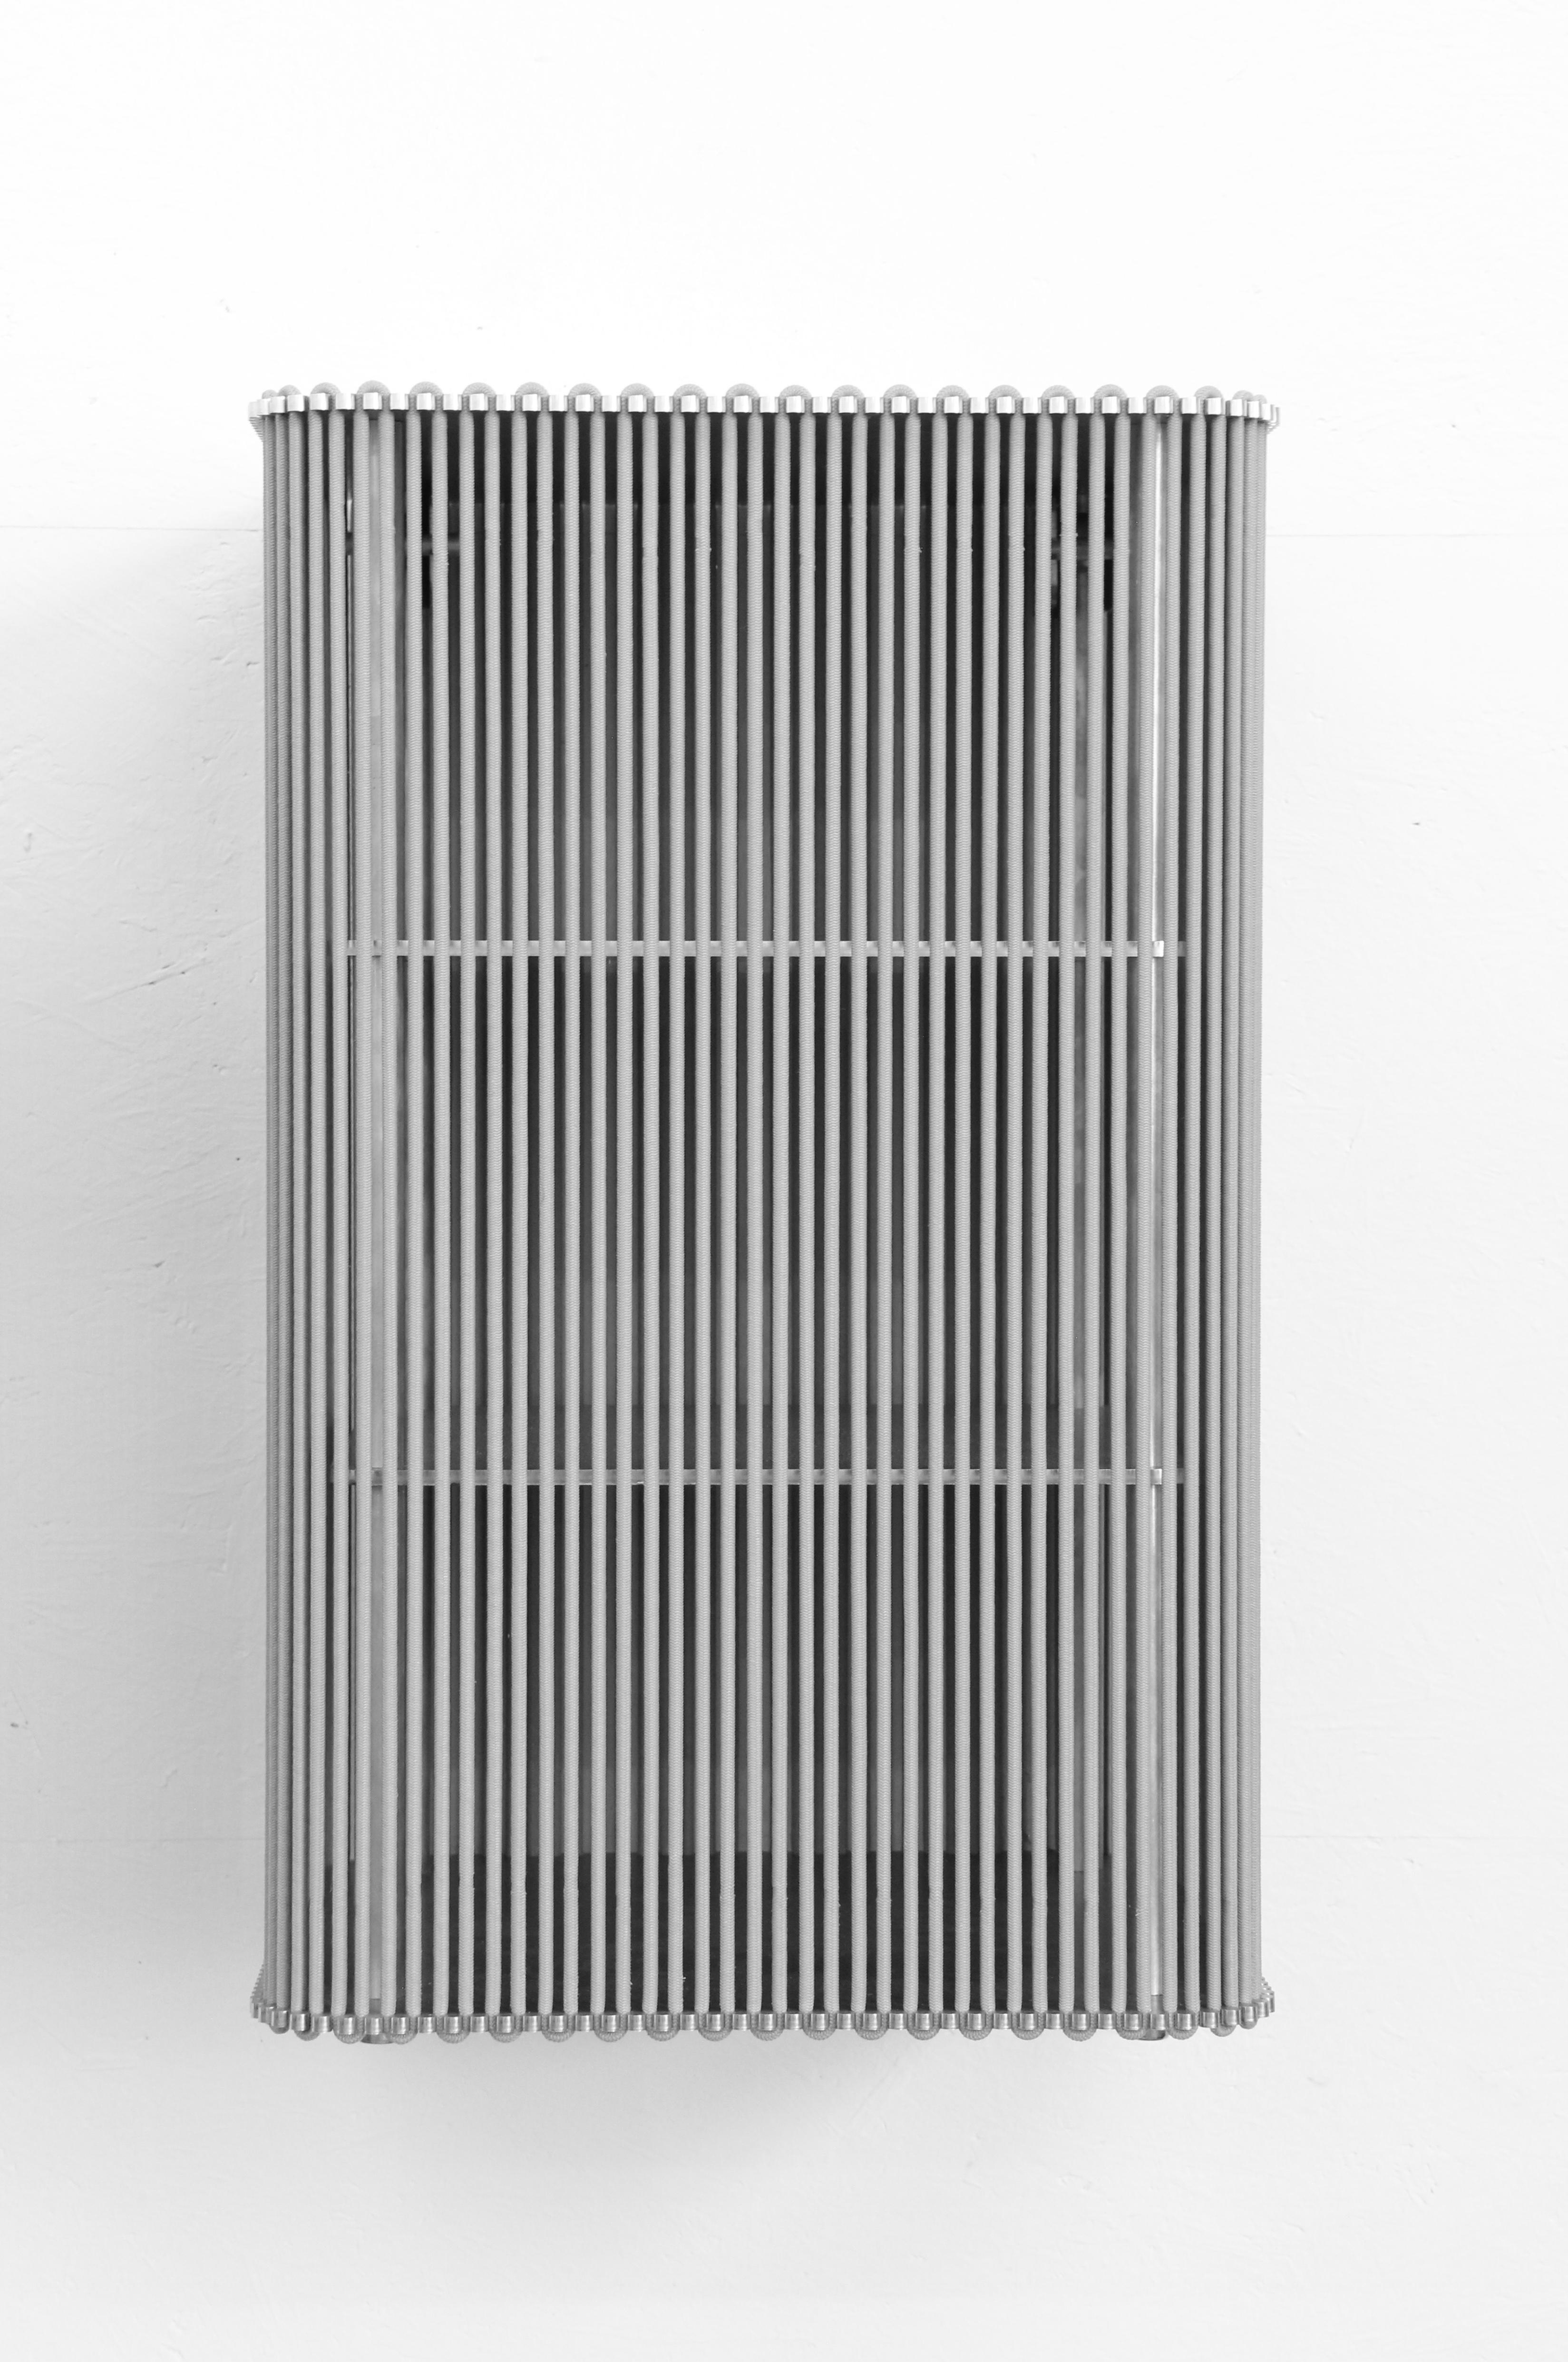 Coil #3 Cabinet Wall Mounted by Bram Kerkhofs For Sale 1